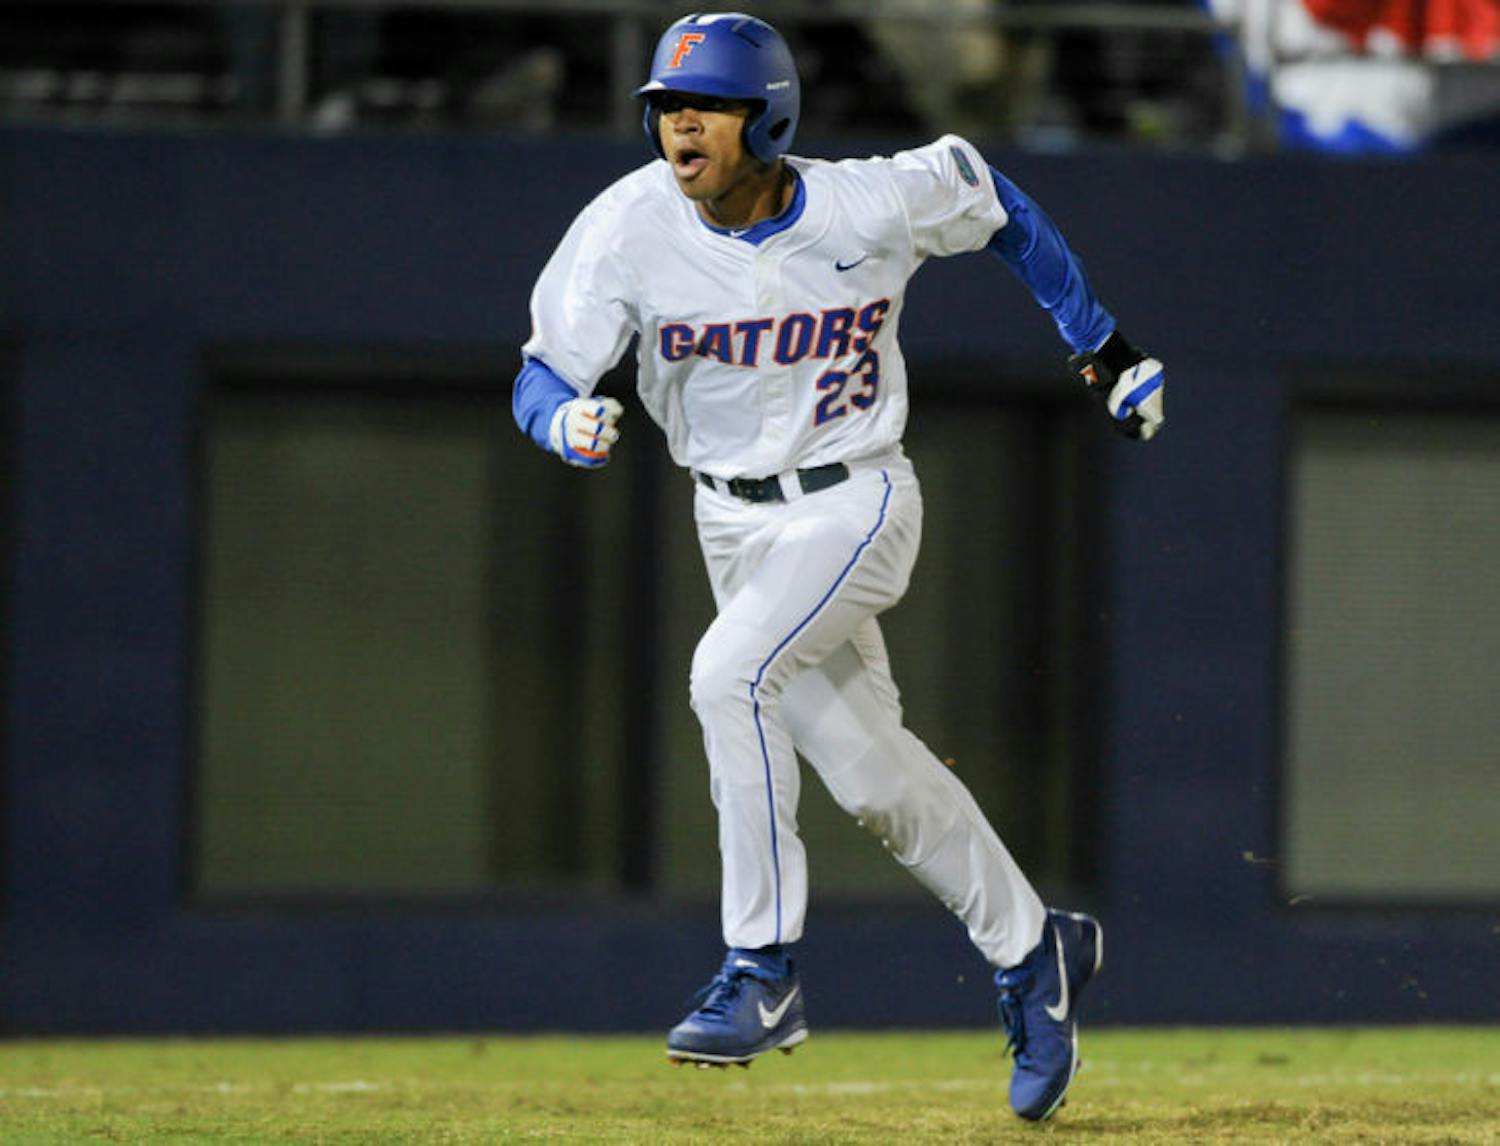 Buddy Reed runs toward home plate during Florida’s 4-0 win against Maryland on Feb. 14 at McKethan Stadium. Reed is hitting .154 in his first five college games.